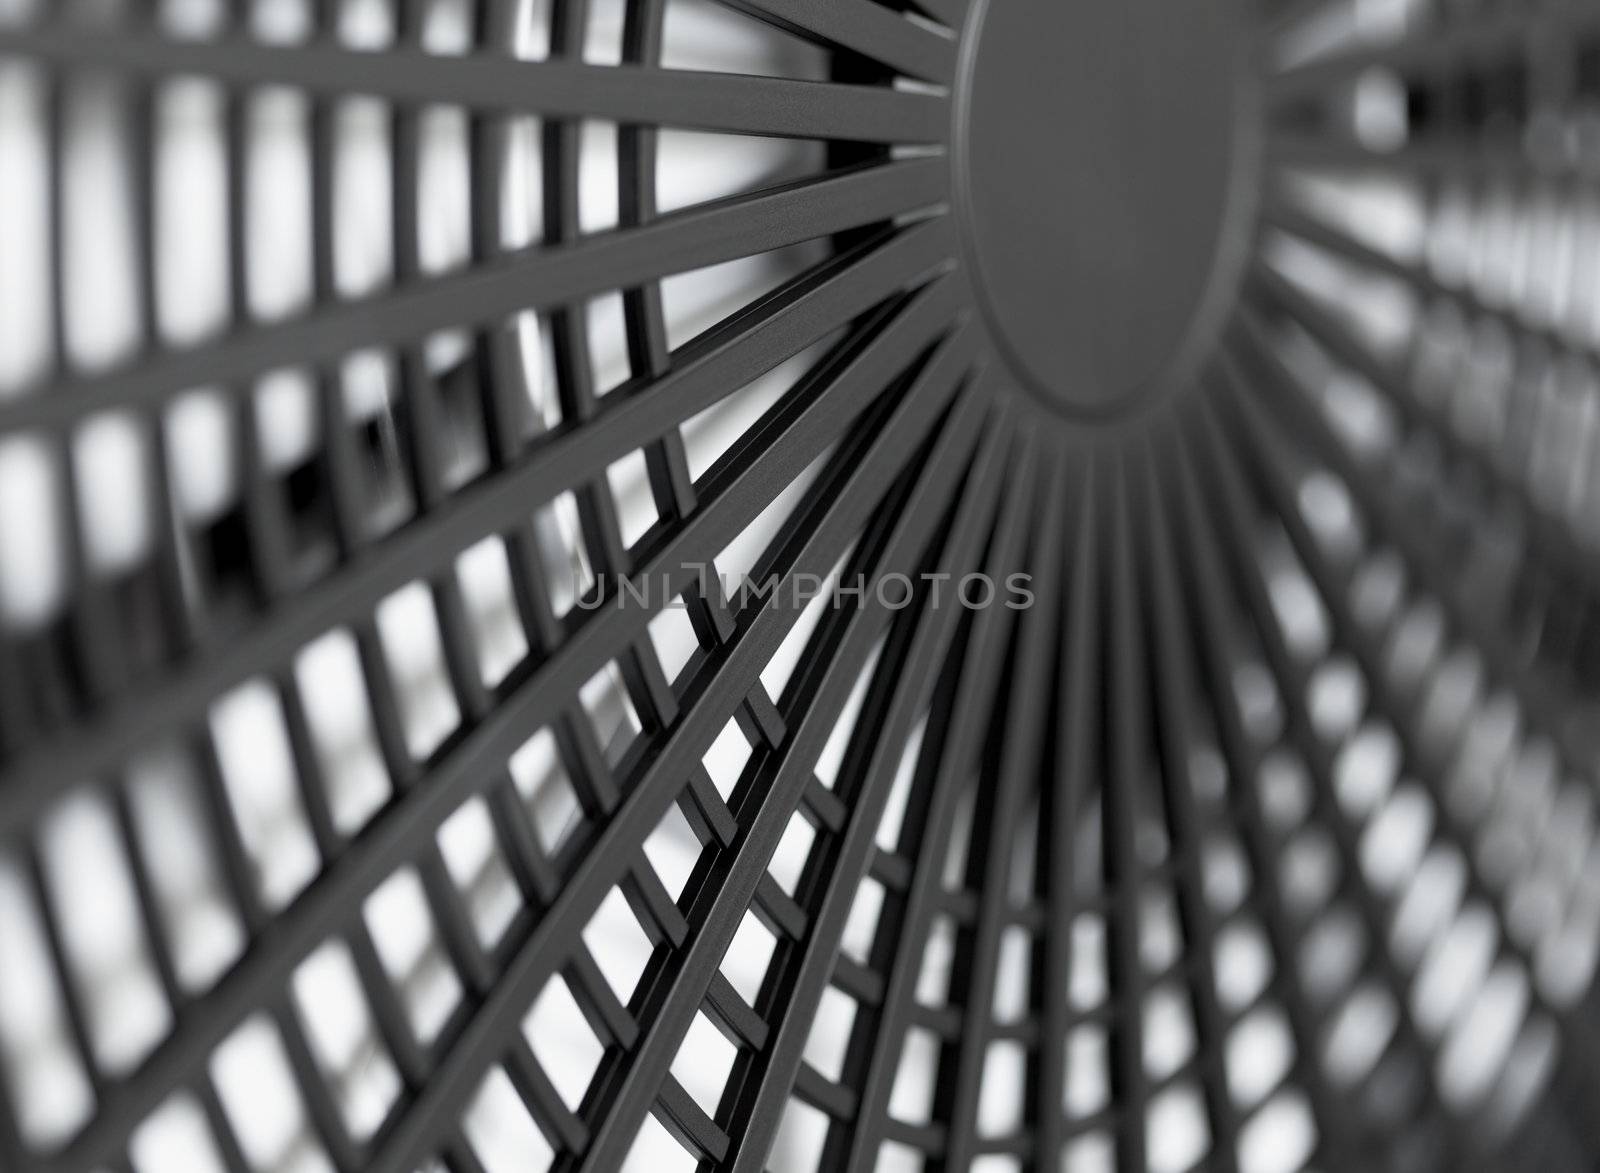 Large industrial fan close-up - abstract background